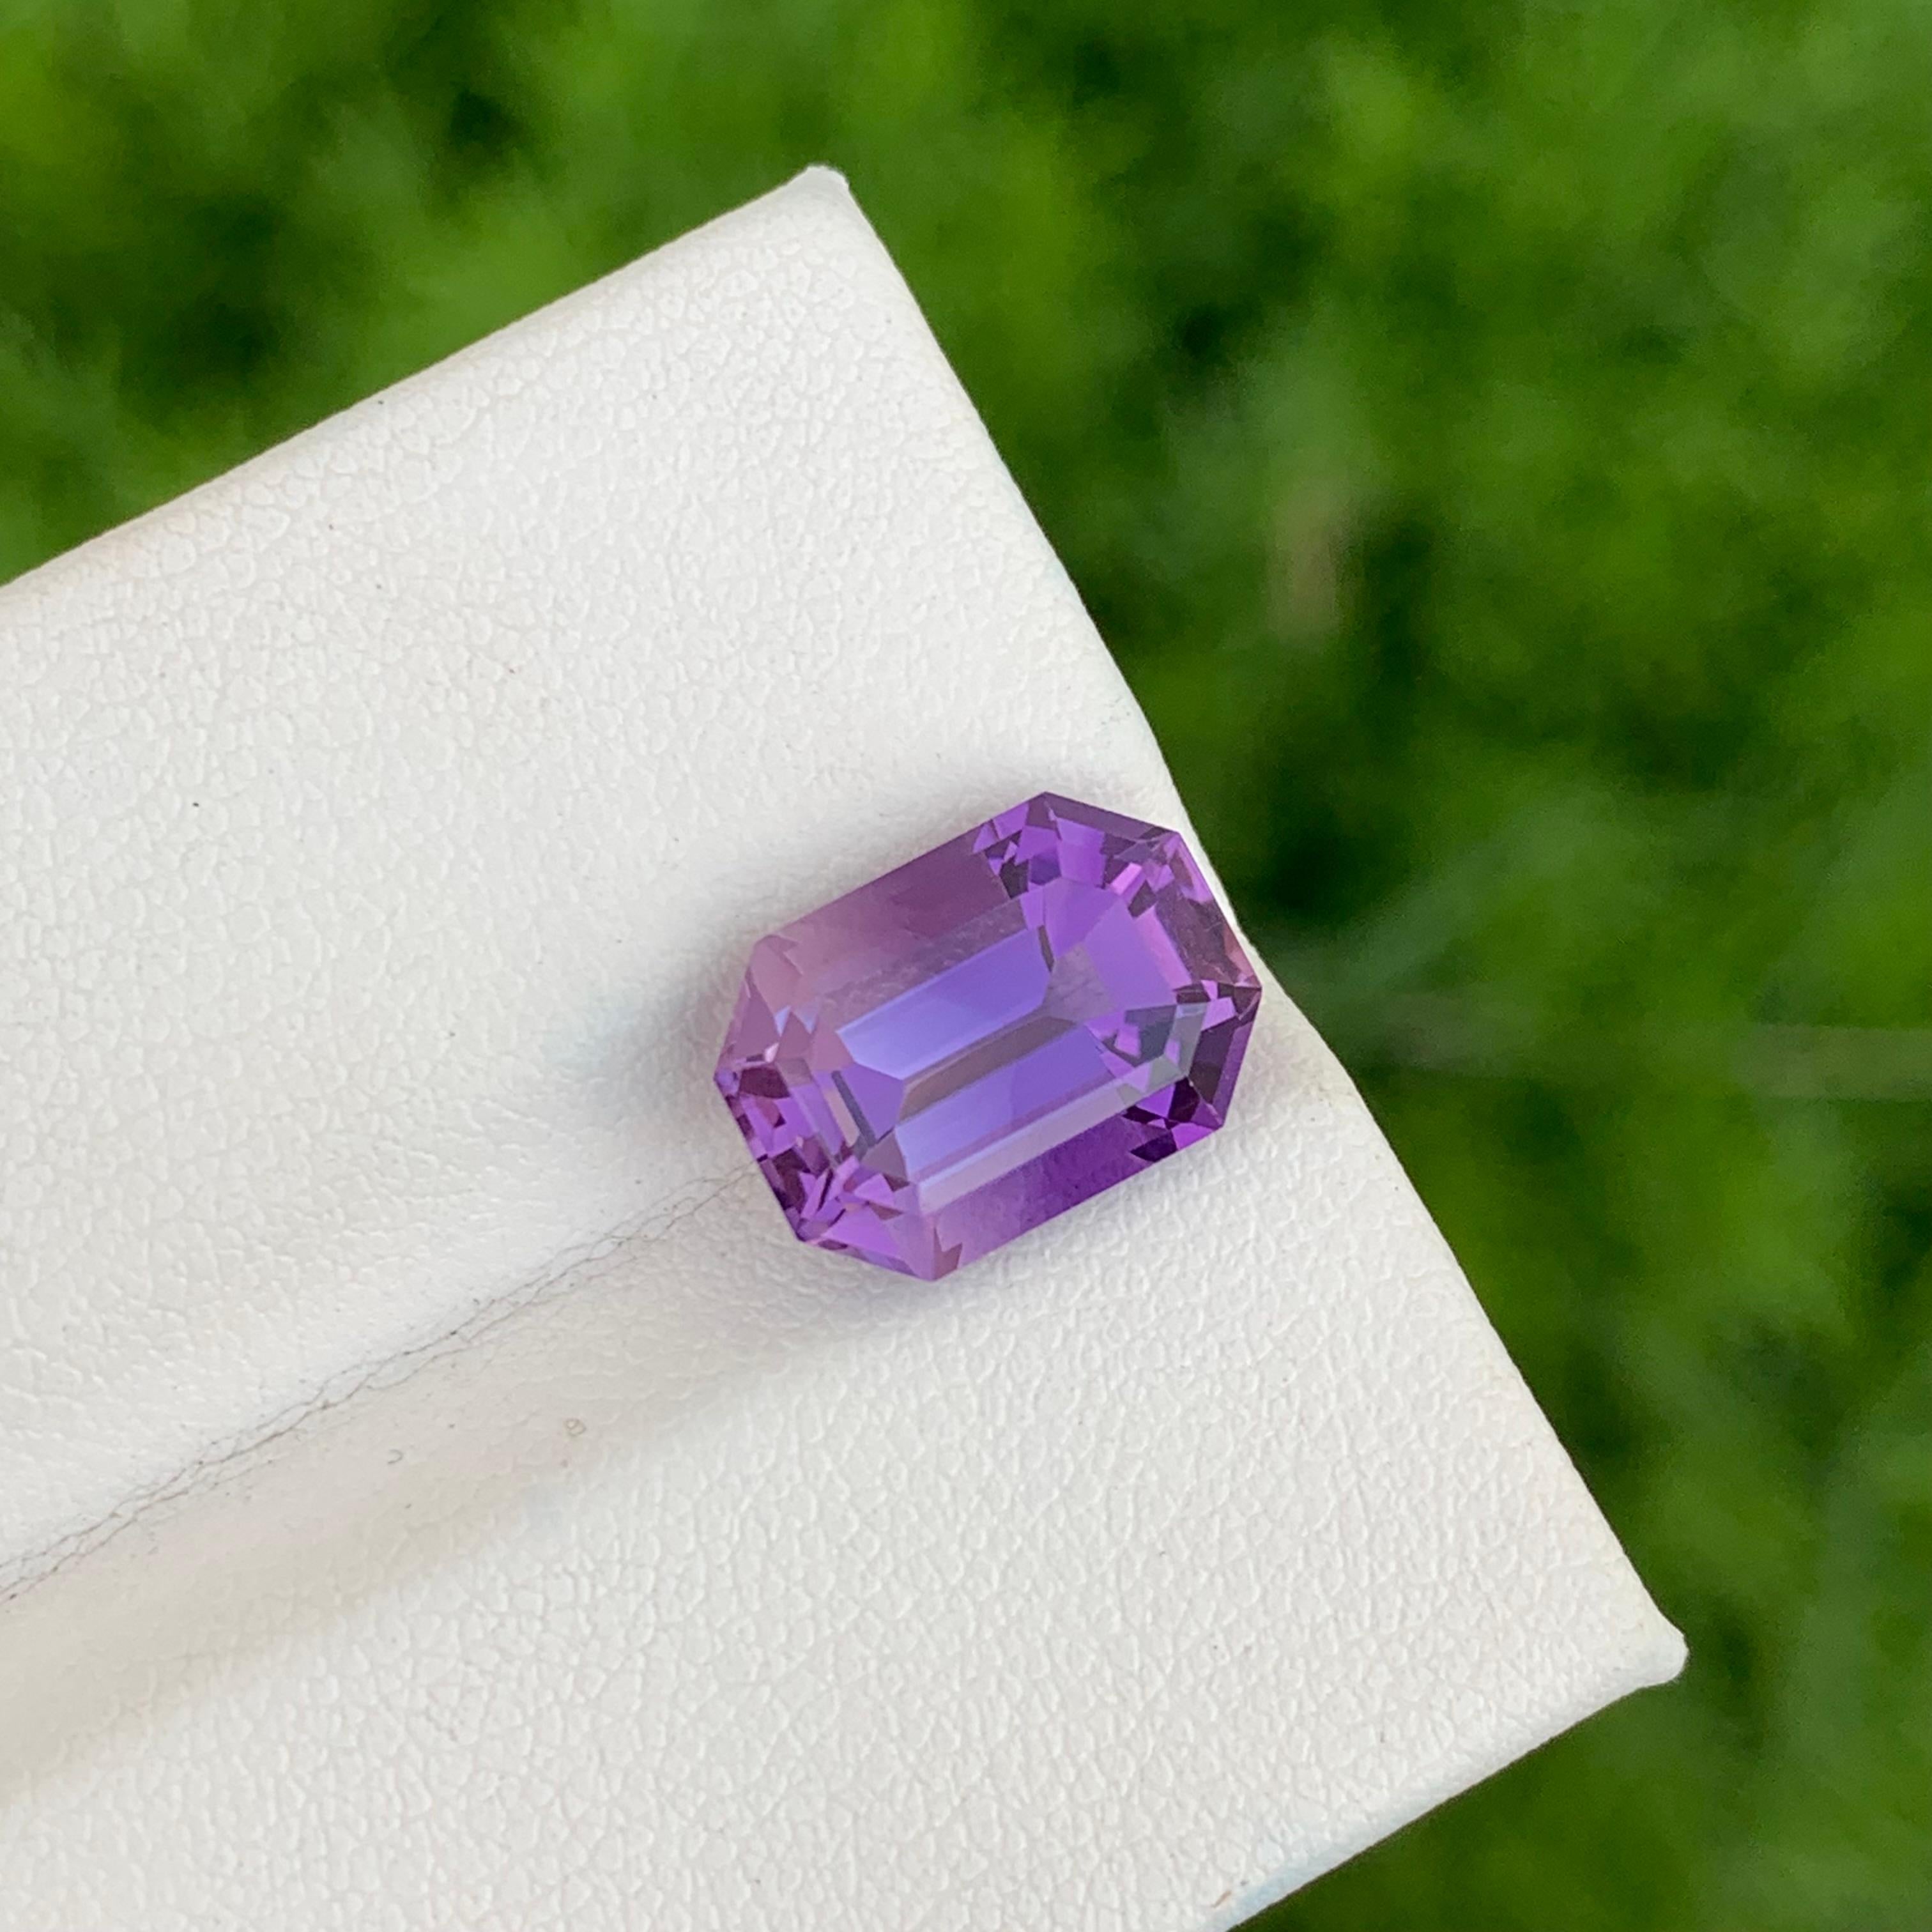 5.60 Carats Stunning Loose Purple Amethyst Gem From Brazil Mine February Stone For Sale 5